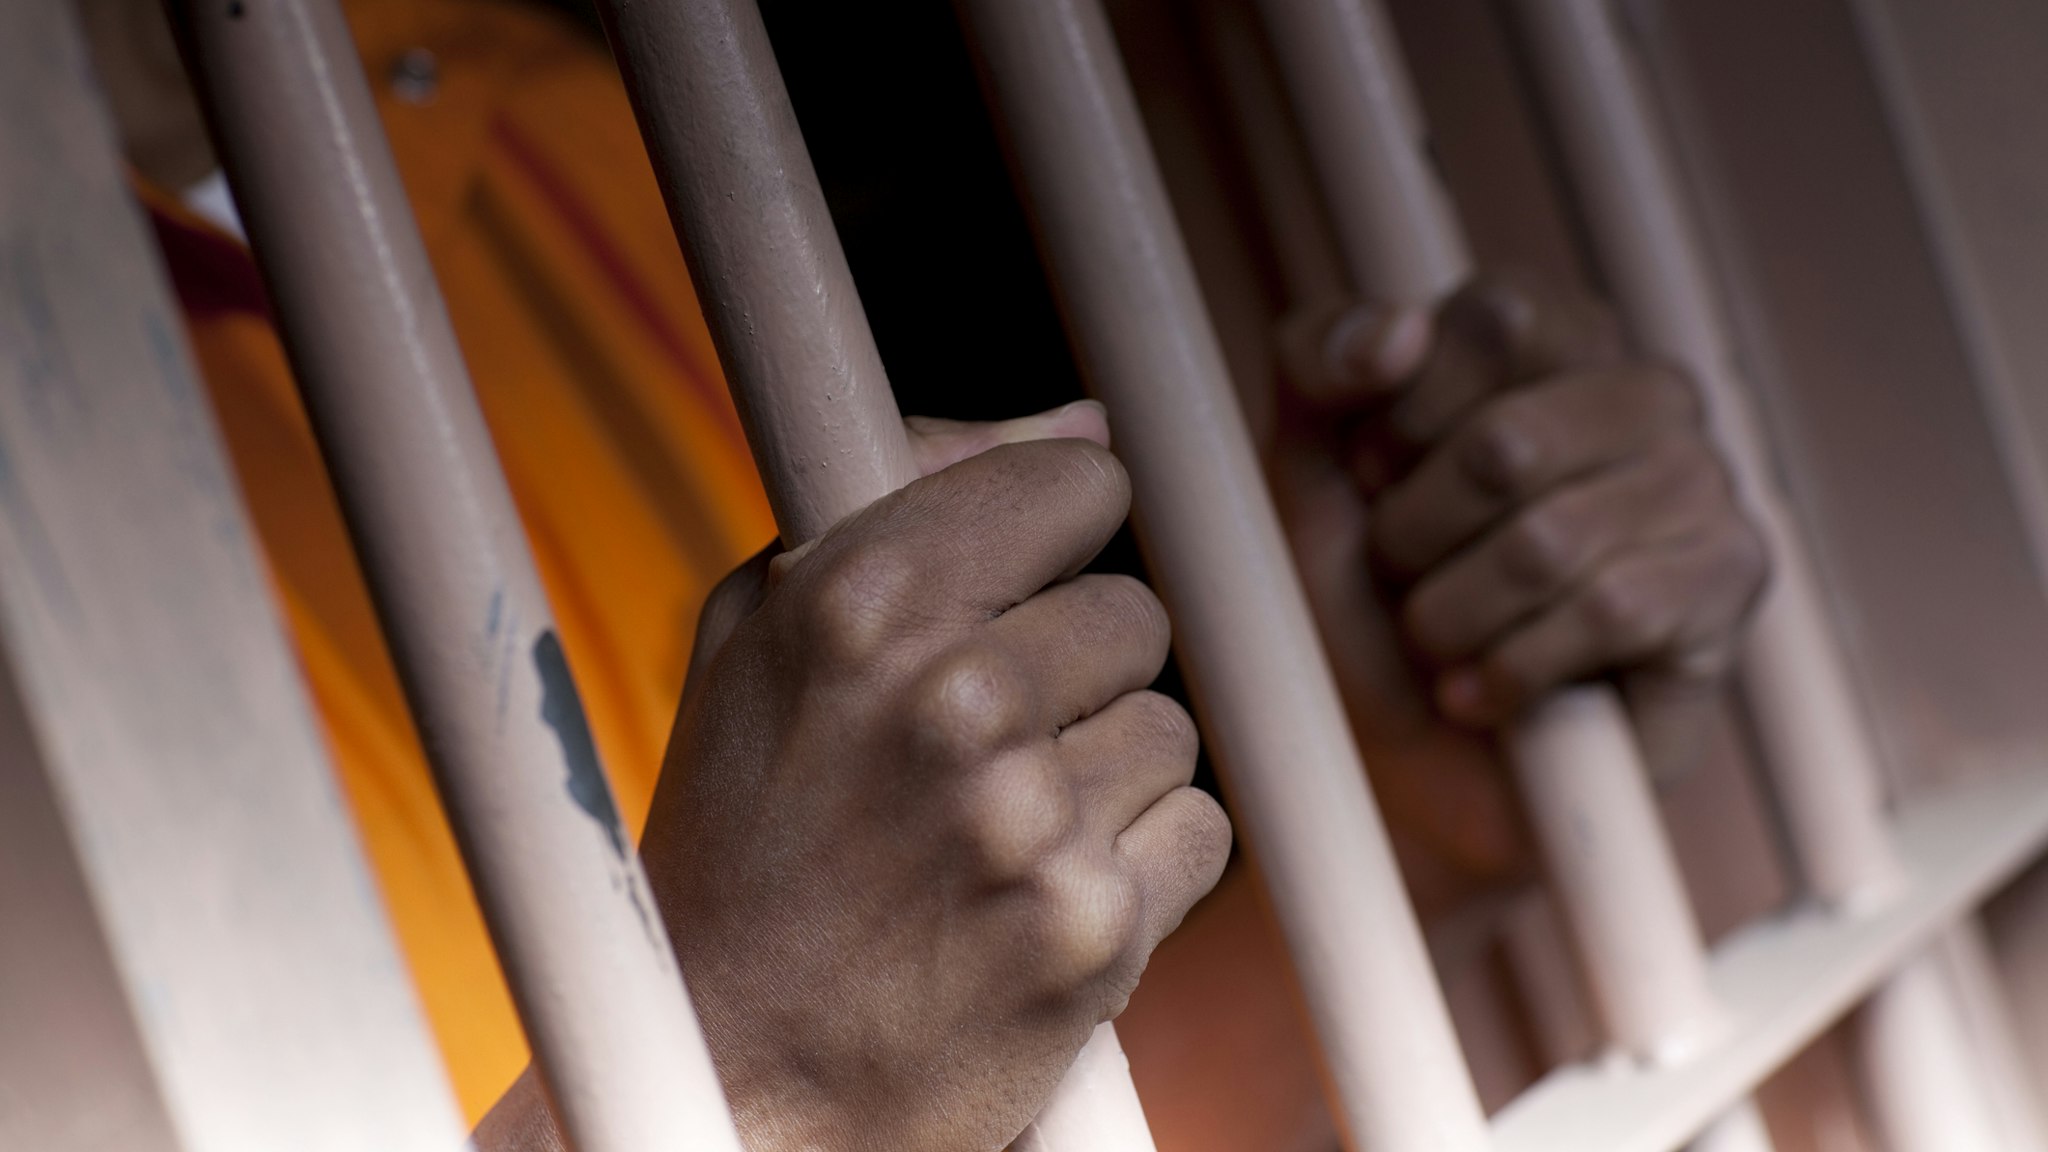 A black man with hands outside the bars of a prison cell